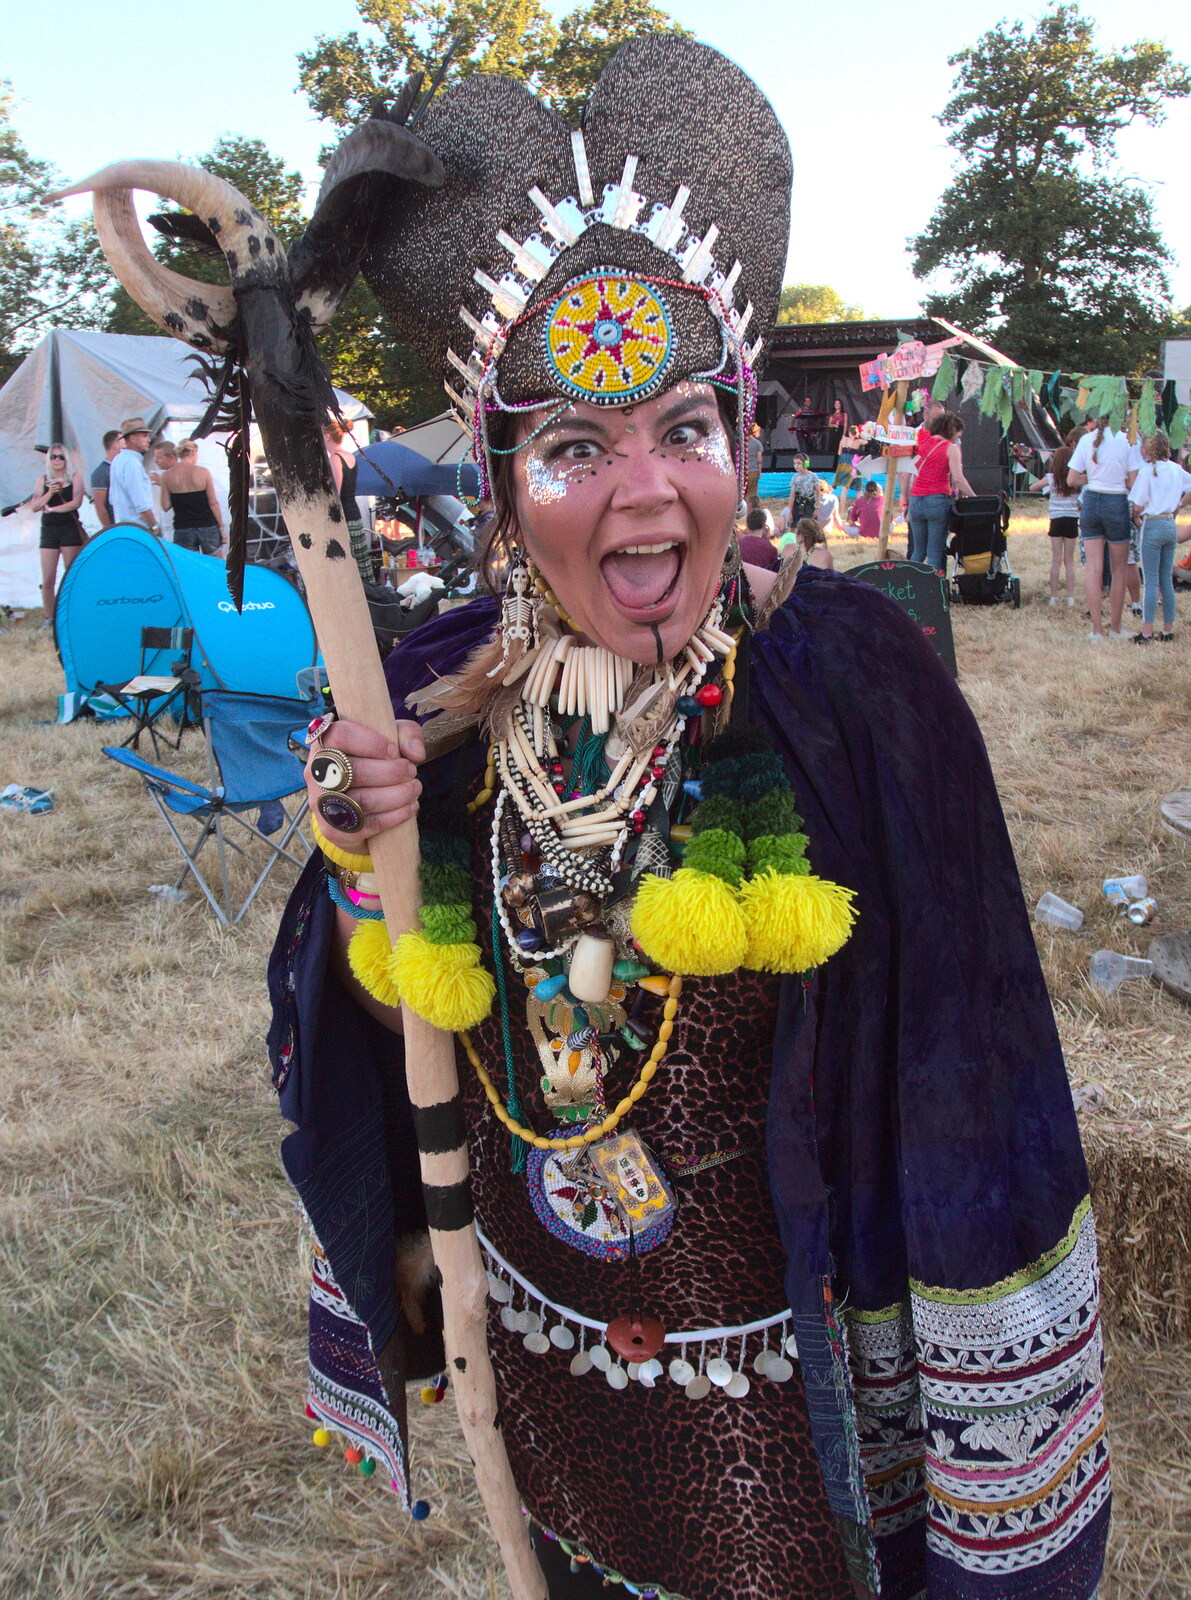 A meso-American woman roams around from WoW Festival, Burston, Norfolk - 29th June - 1st July 2018